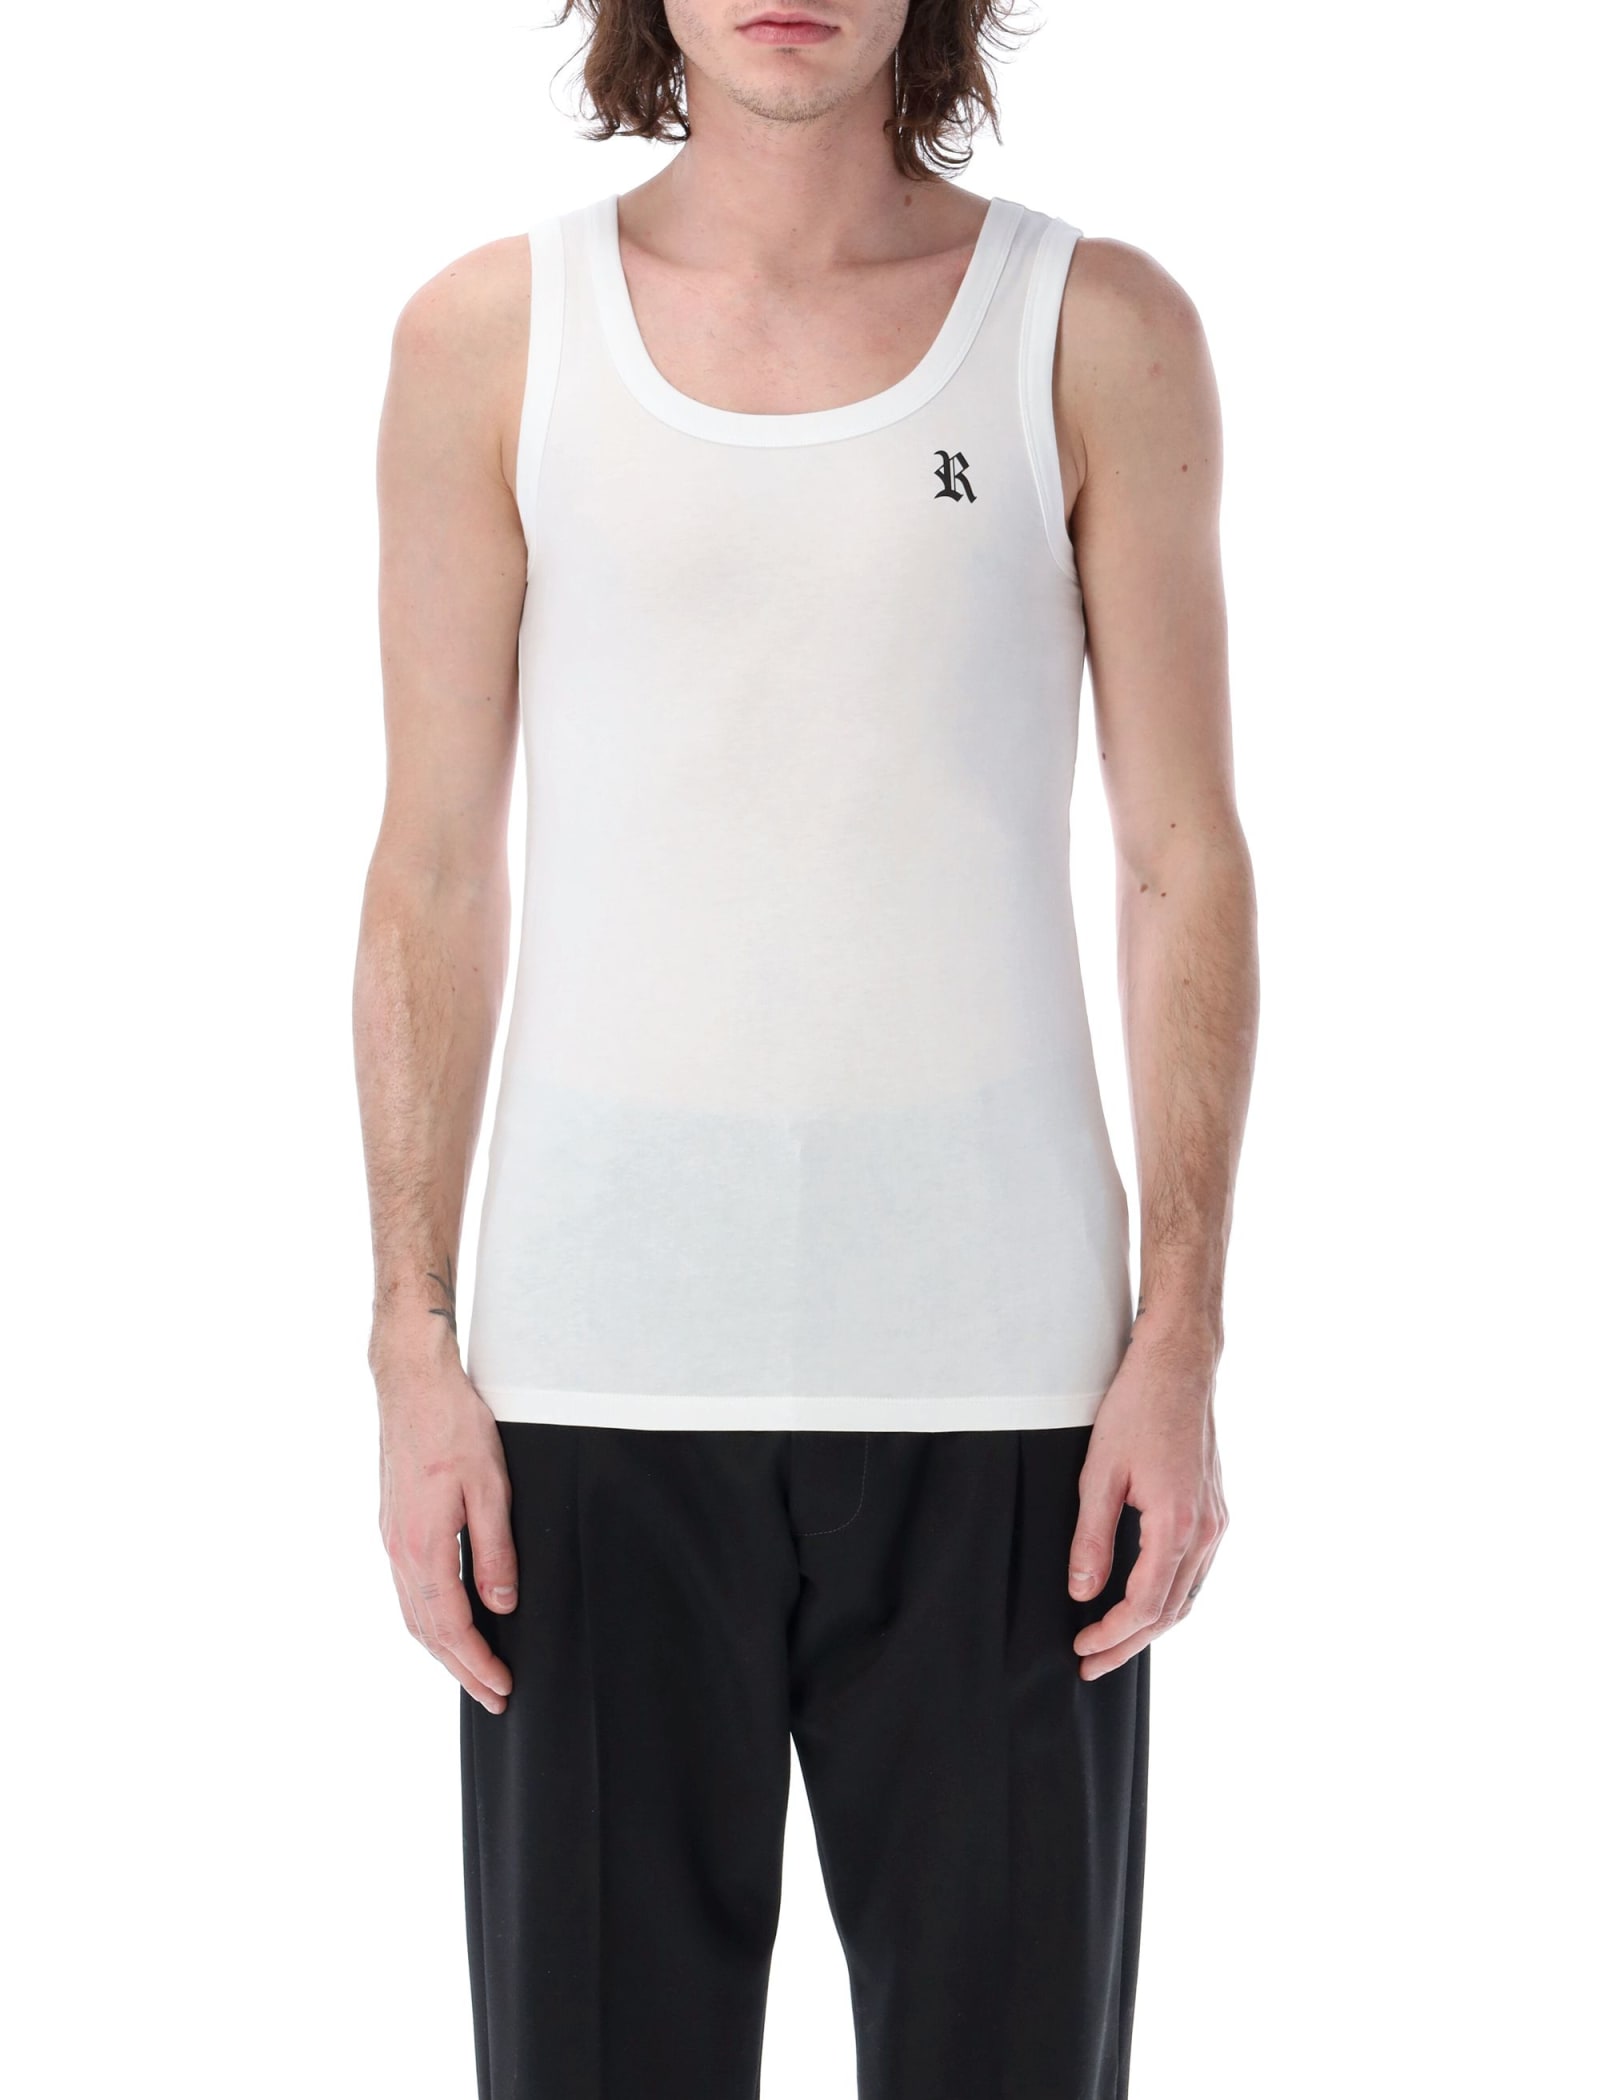 RAF SIMONS TANK TOP WITH R PRINT AND LEATHER PATCH